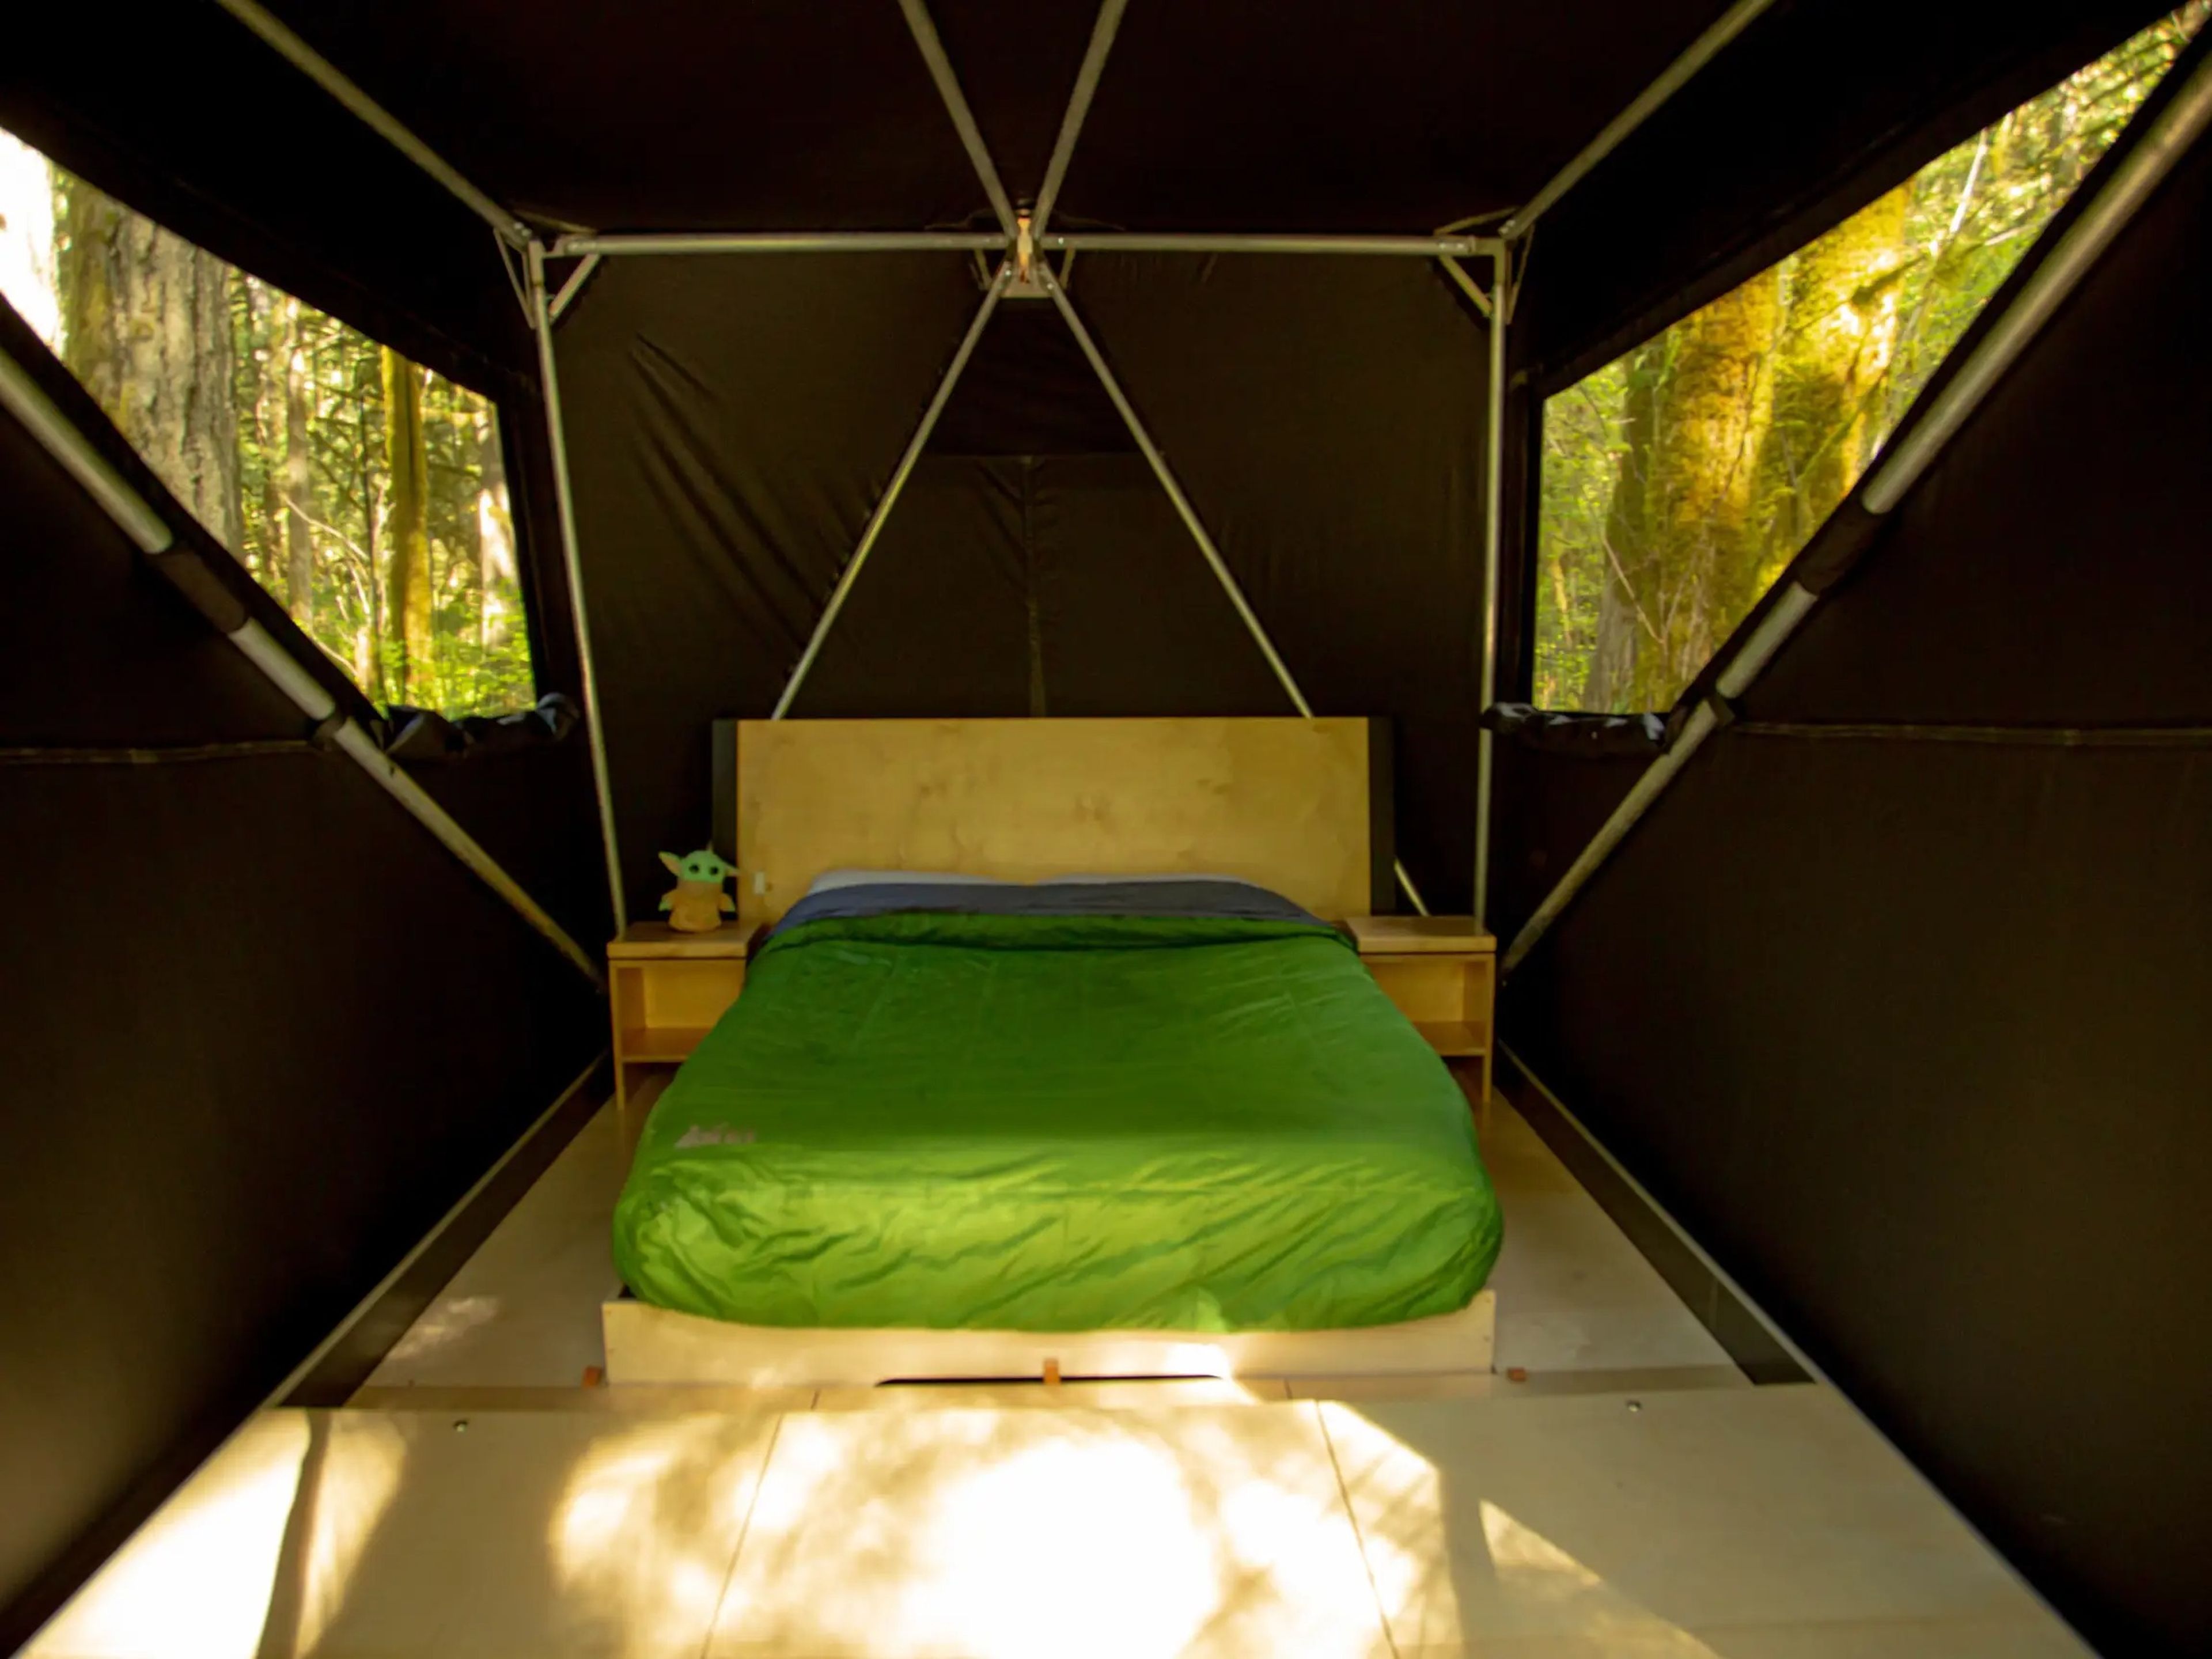 Jupe's off-grid tiny home hotel.